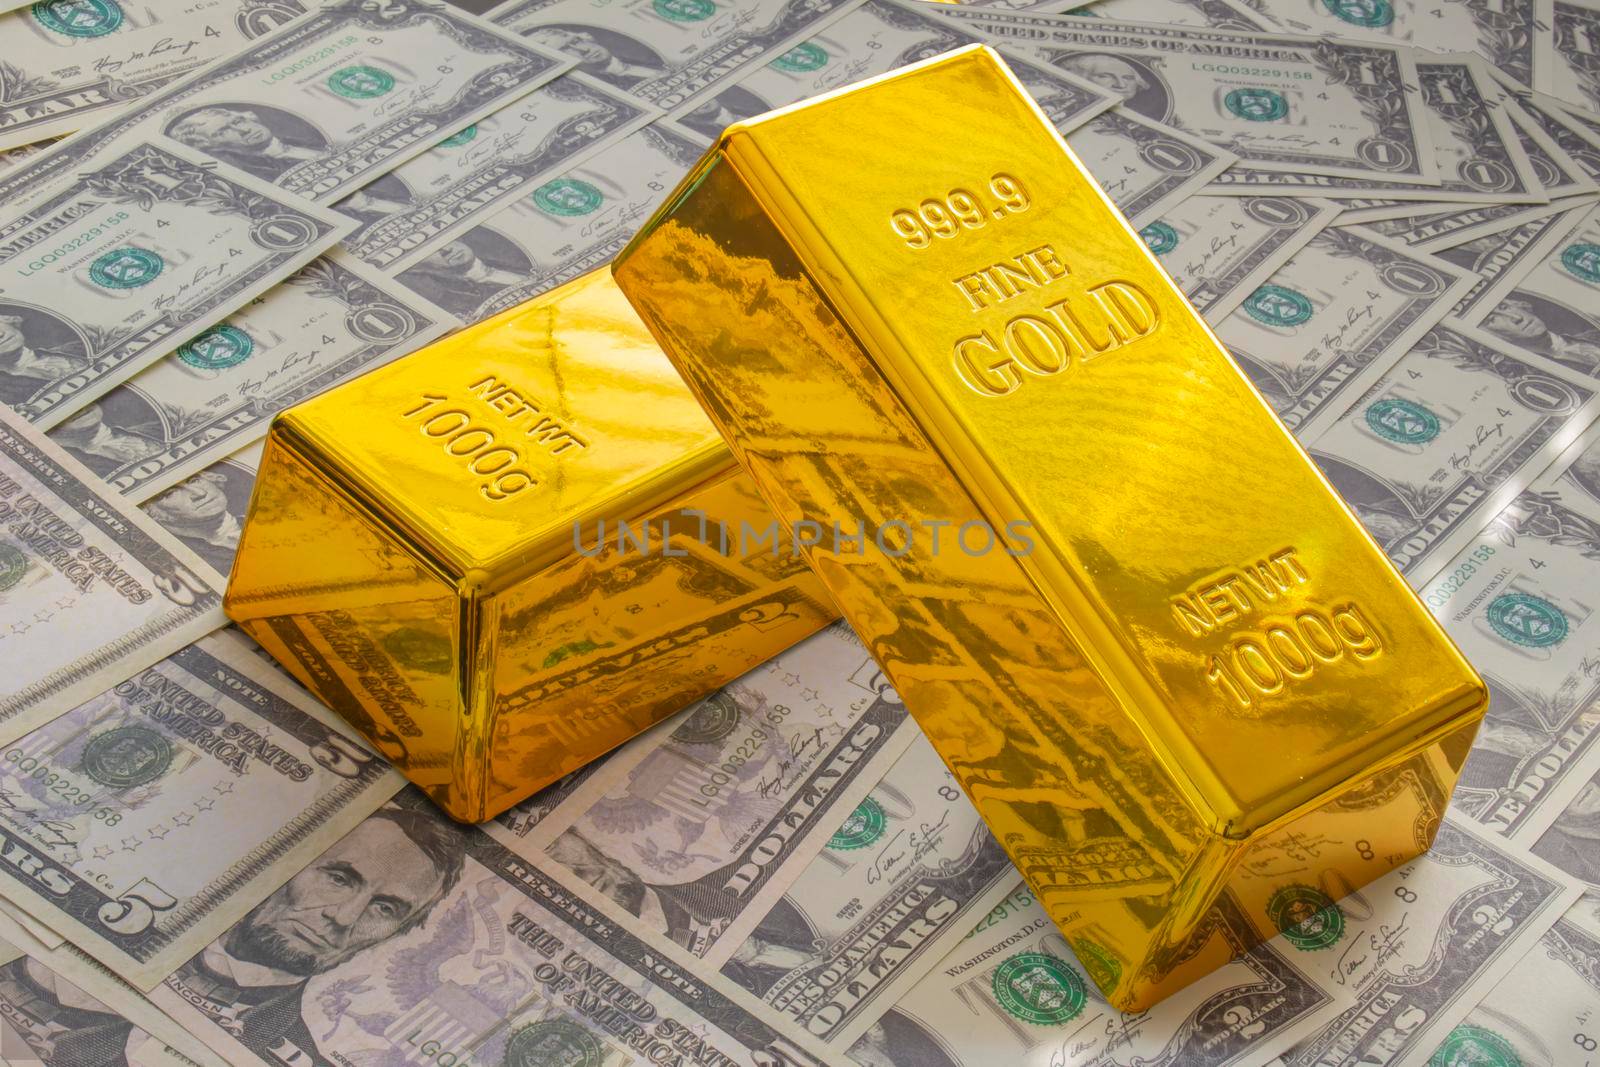 Calgary, Alberta, Canada. April 10, 2021. A Couple of Gold Bars or Golden Bricks Bullions on American USA currency. by oasisamuel